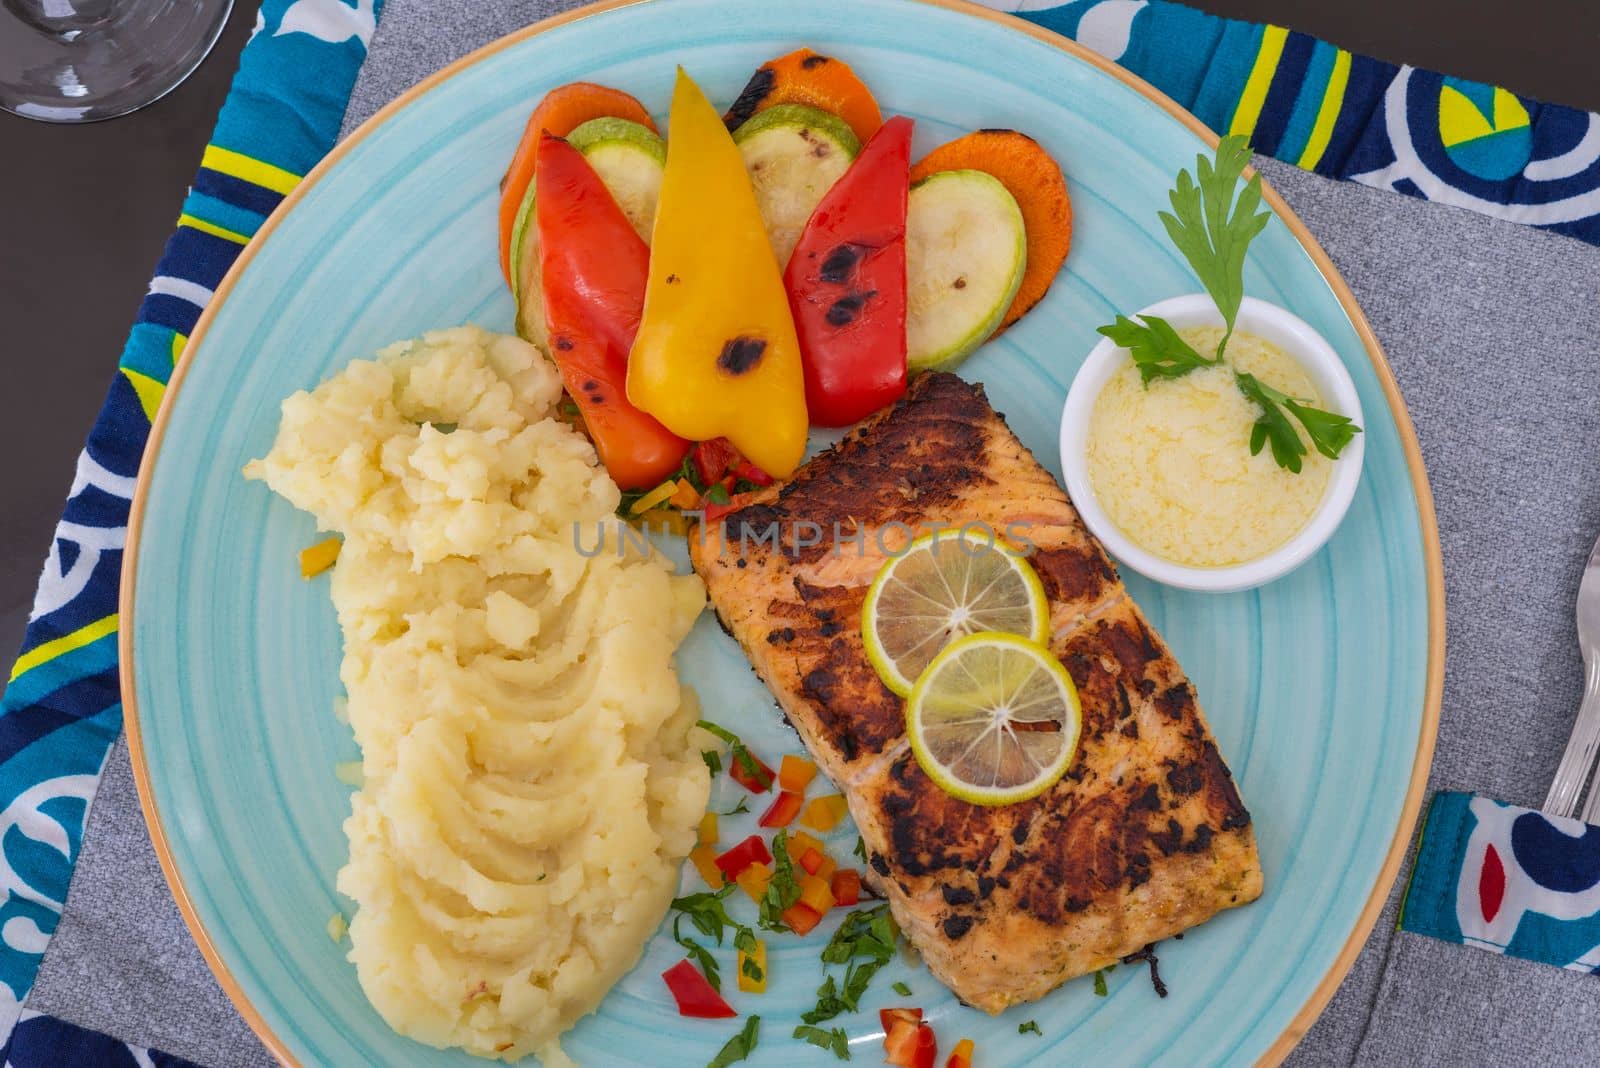 Salmon steak a la carte meal with tartar sauce dip vegetables and mashed potato at restaurant table setting